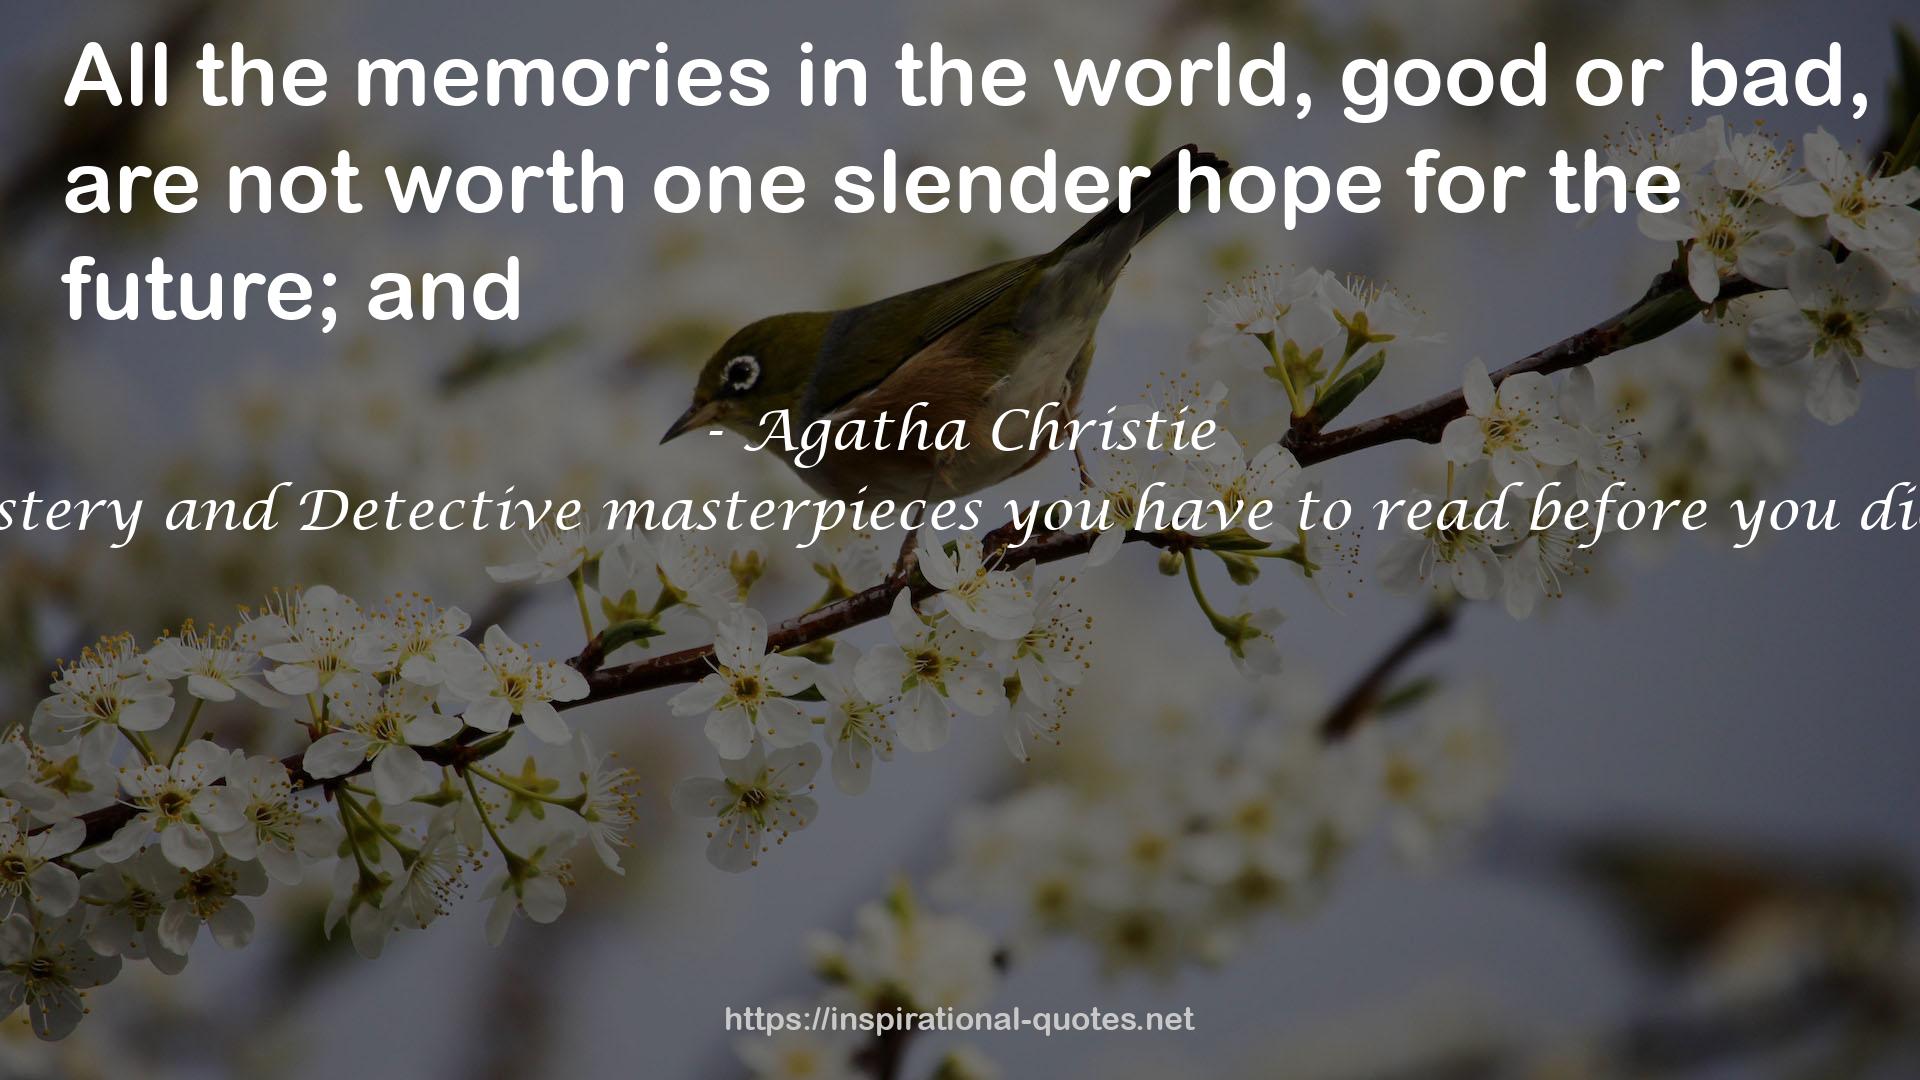 50 Mystery and Detective masterpieces you have to read before you die vol: 2 QUOTES